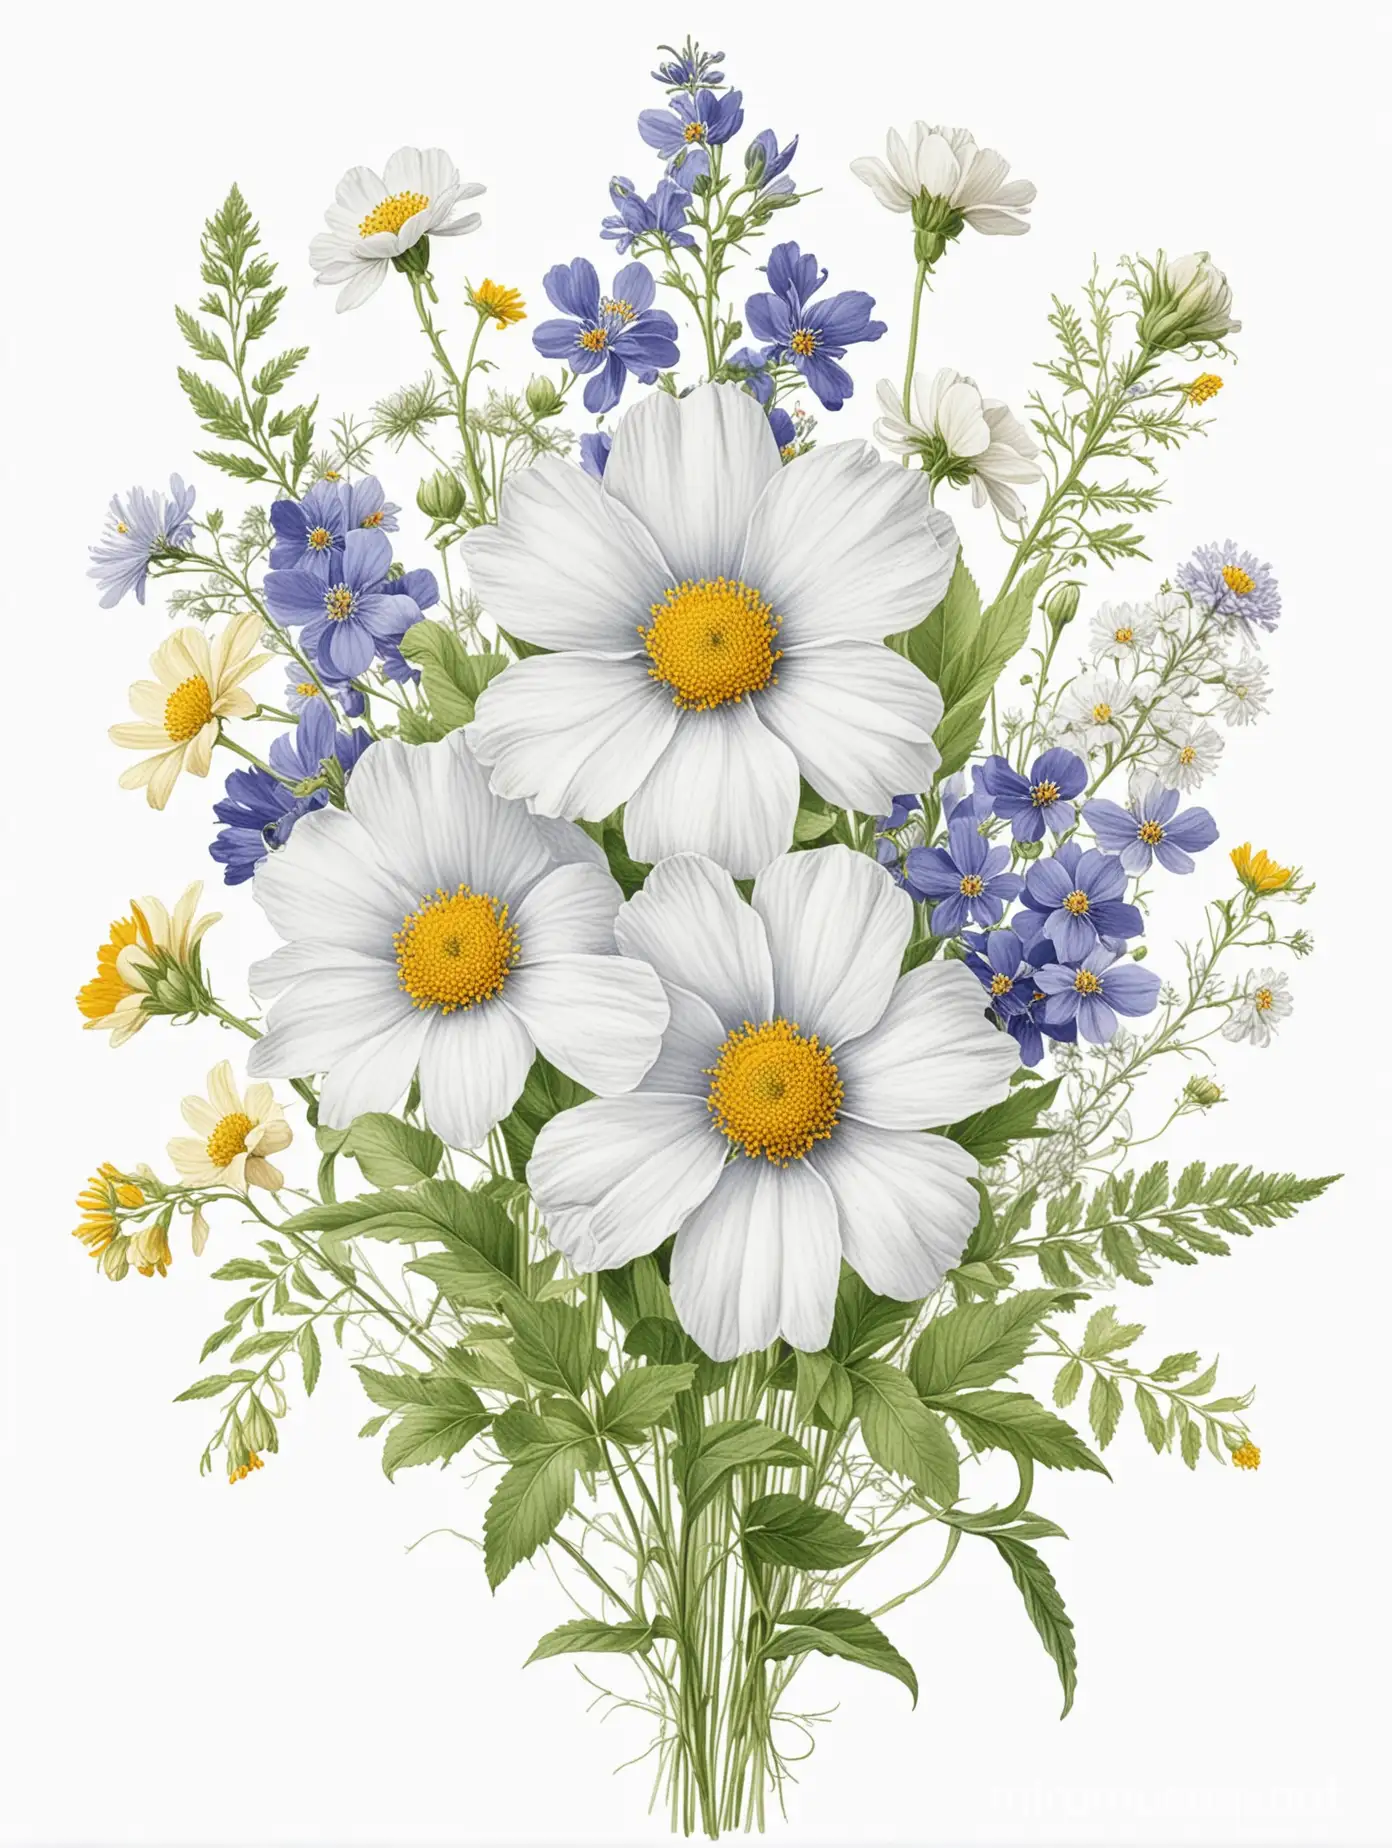 wildflower illustration, white background, single flower or bunch of flowers, center in image and do not exceed border